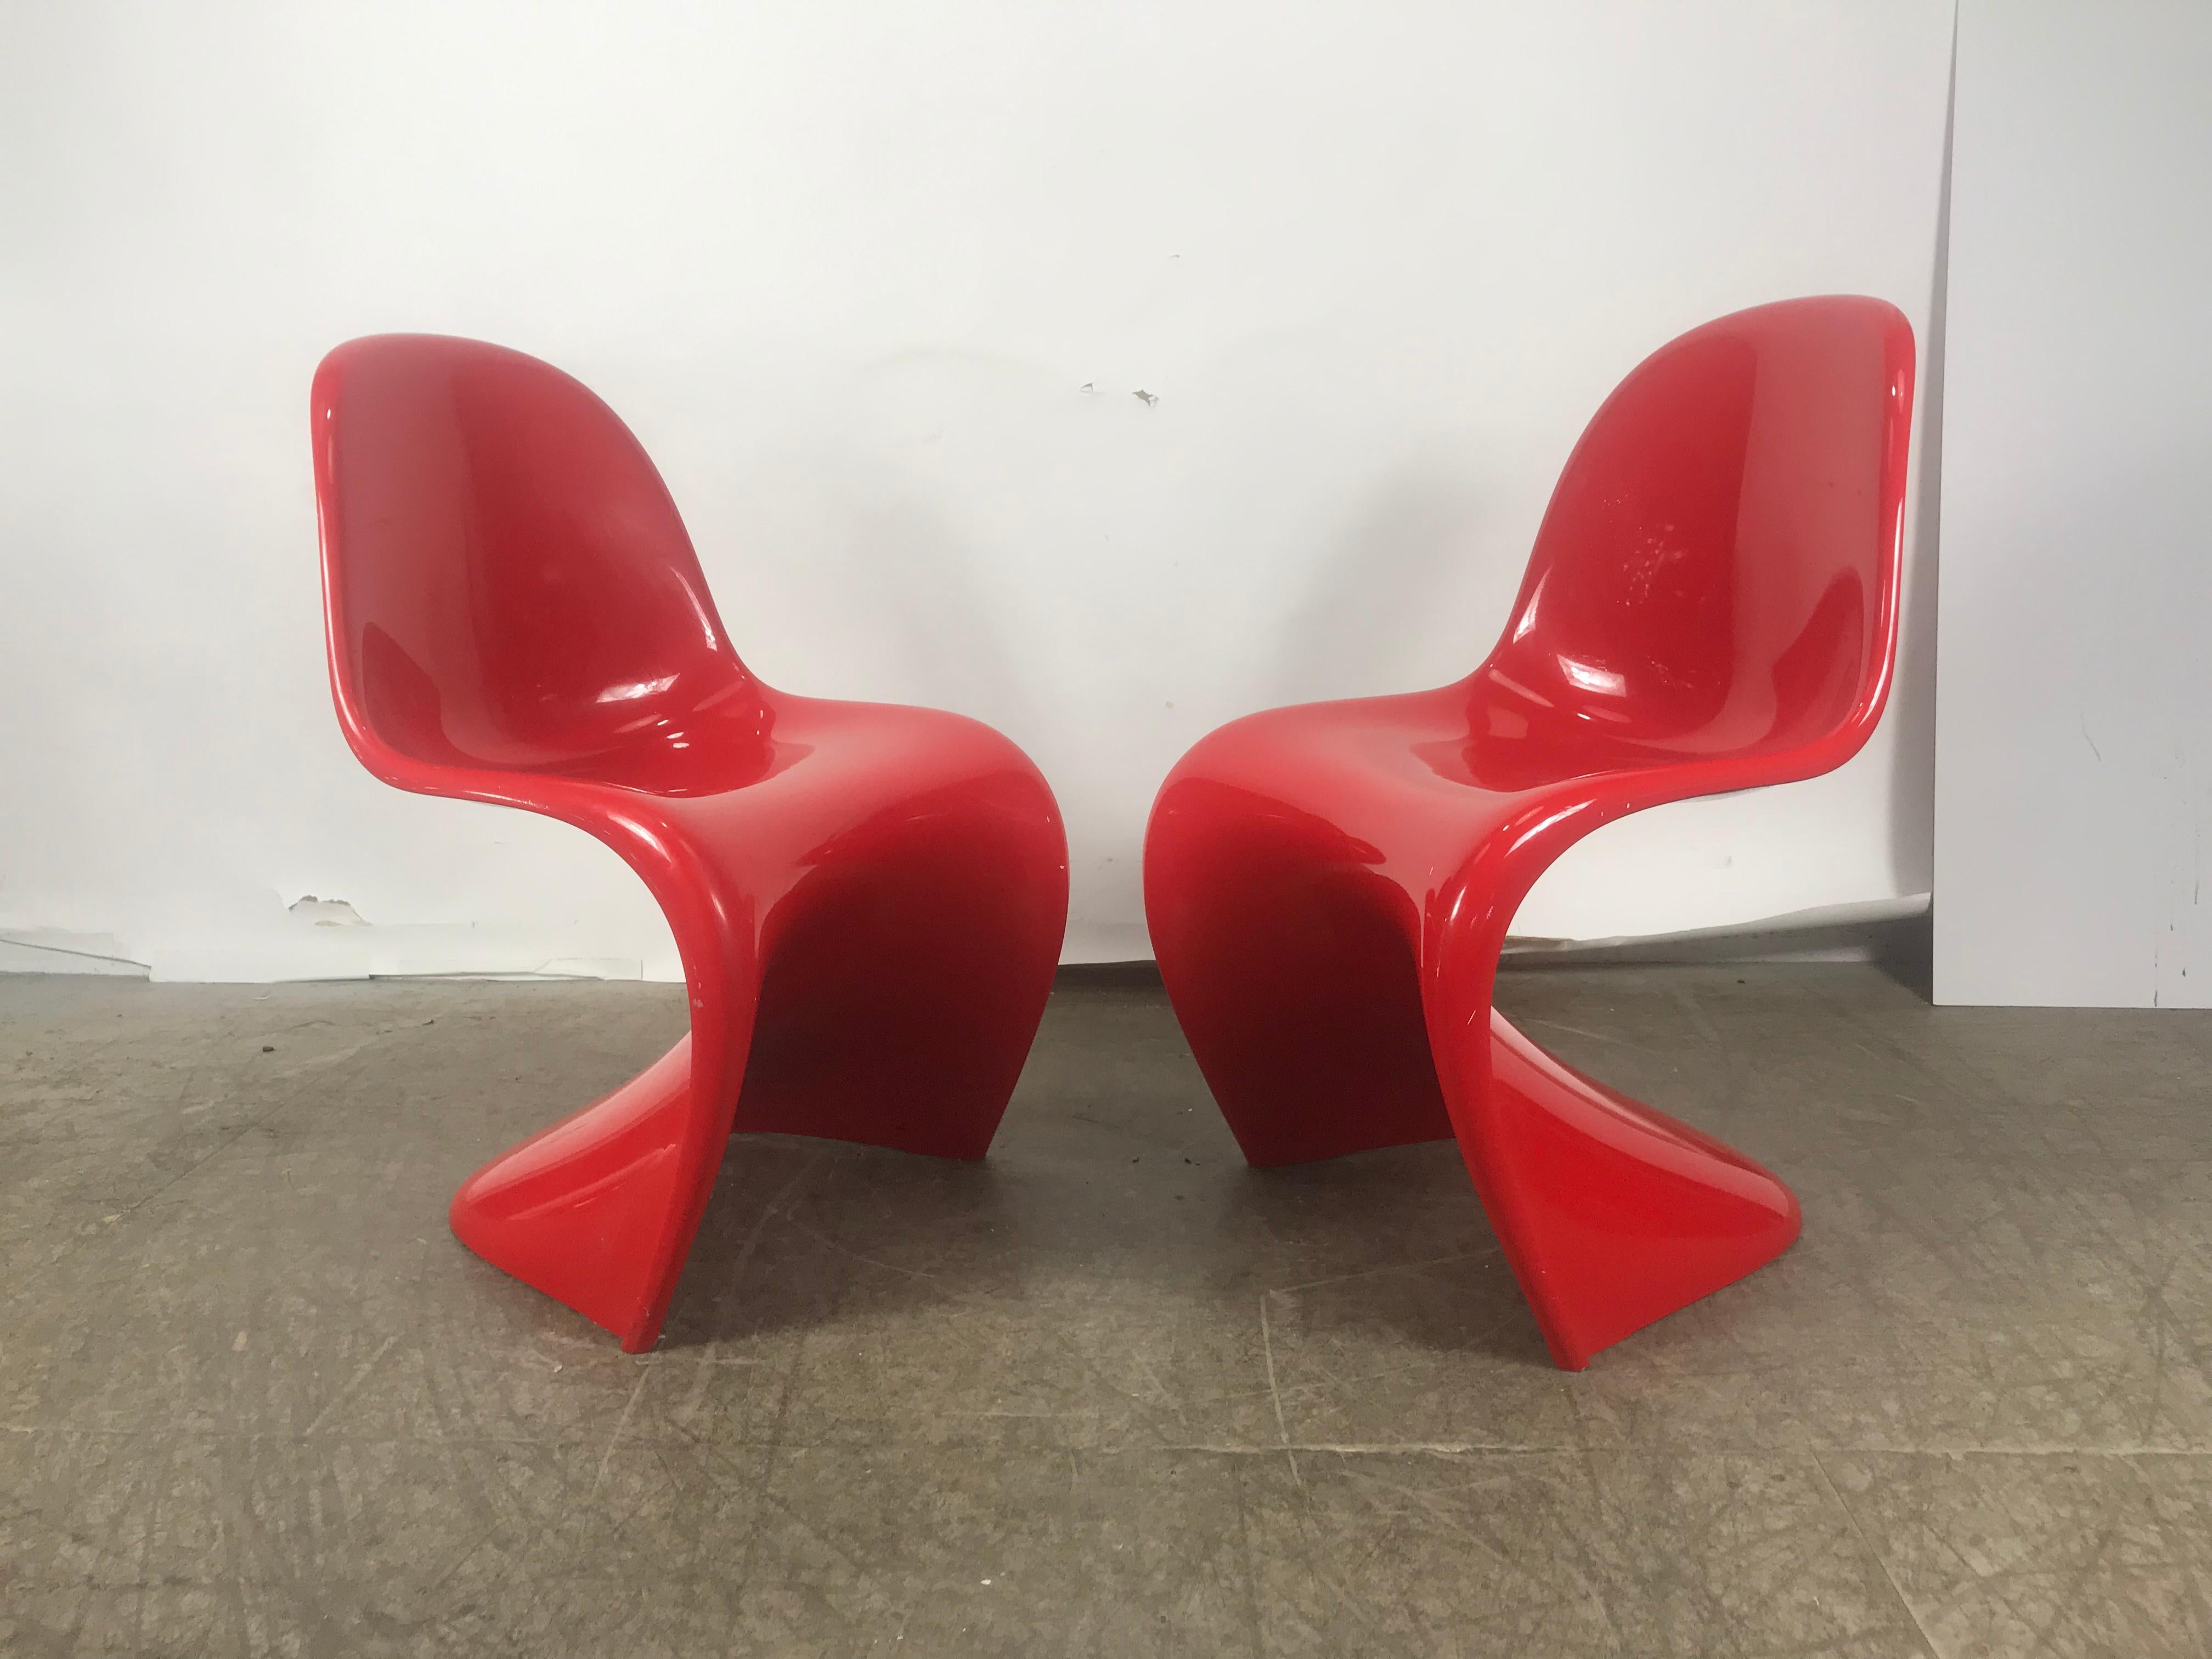 An iconic red stacking chair by influential Danish architect and designer Verner Panton (1926-1998). Designed in 1958, this cantilevered, stackable chair is the first single-form, injection-molded plastic chair ever produced. A masterpiece of design